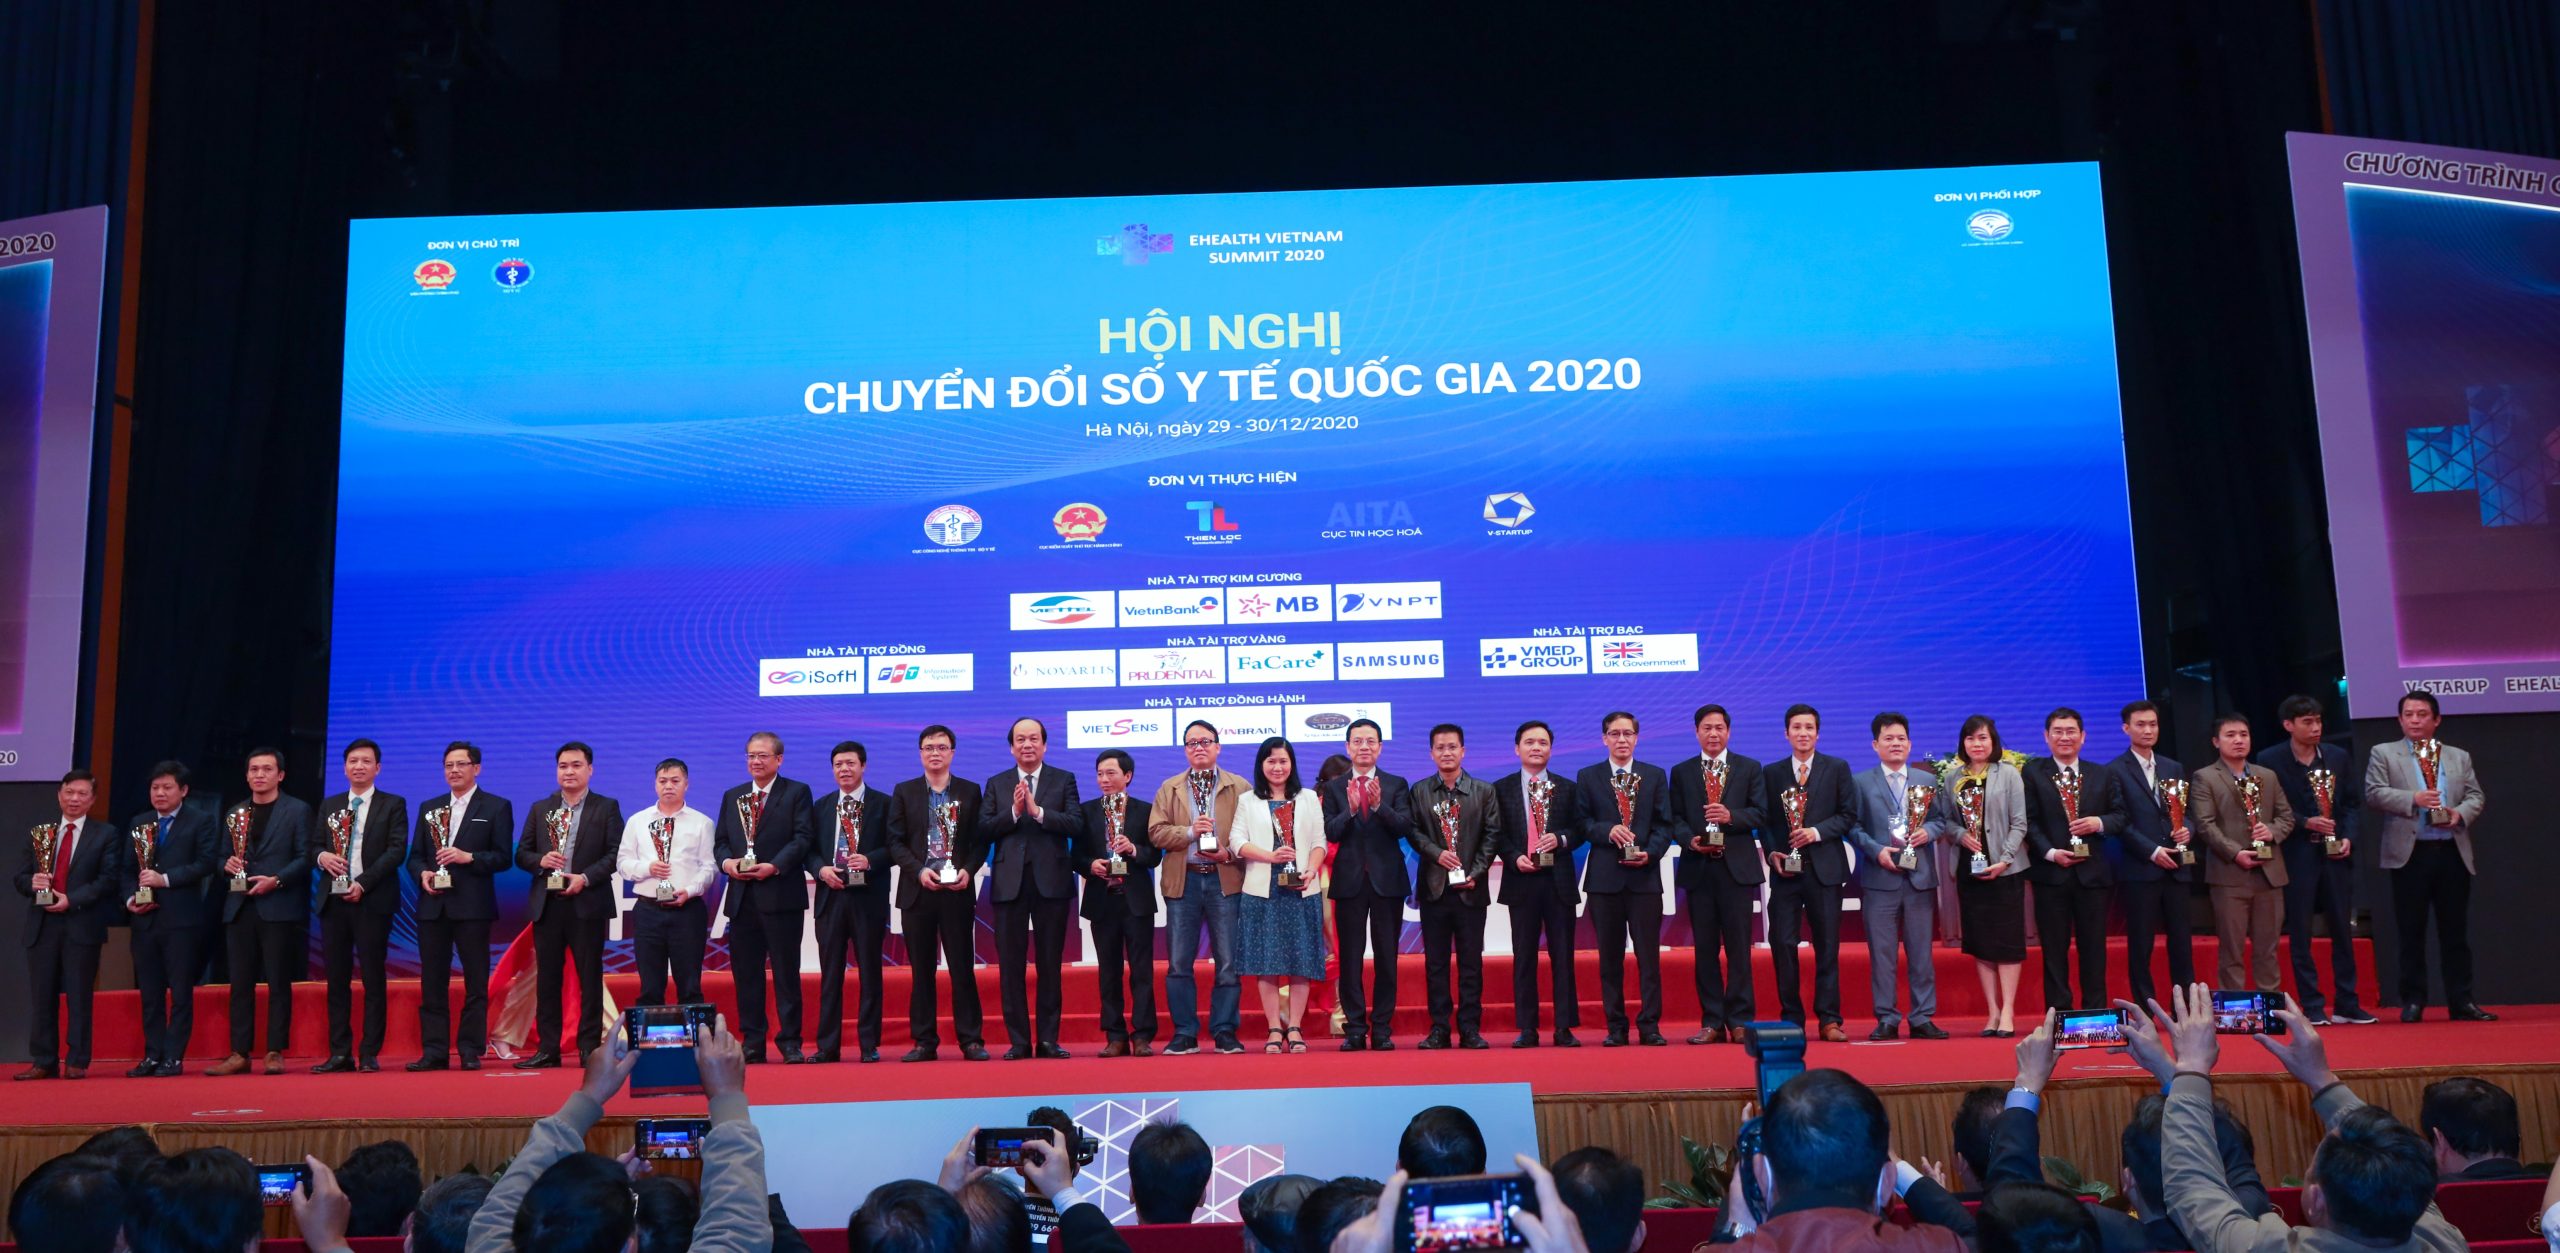 Certificate of Merit from the Director of the Department of Information Technology – Ministry of Health of Vietnam for FPT IS’s significant contributions to digital transformation in Healthcare in 2020